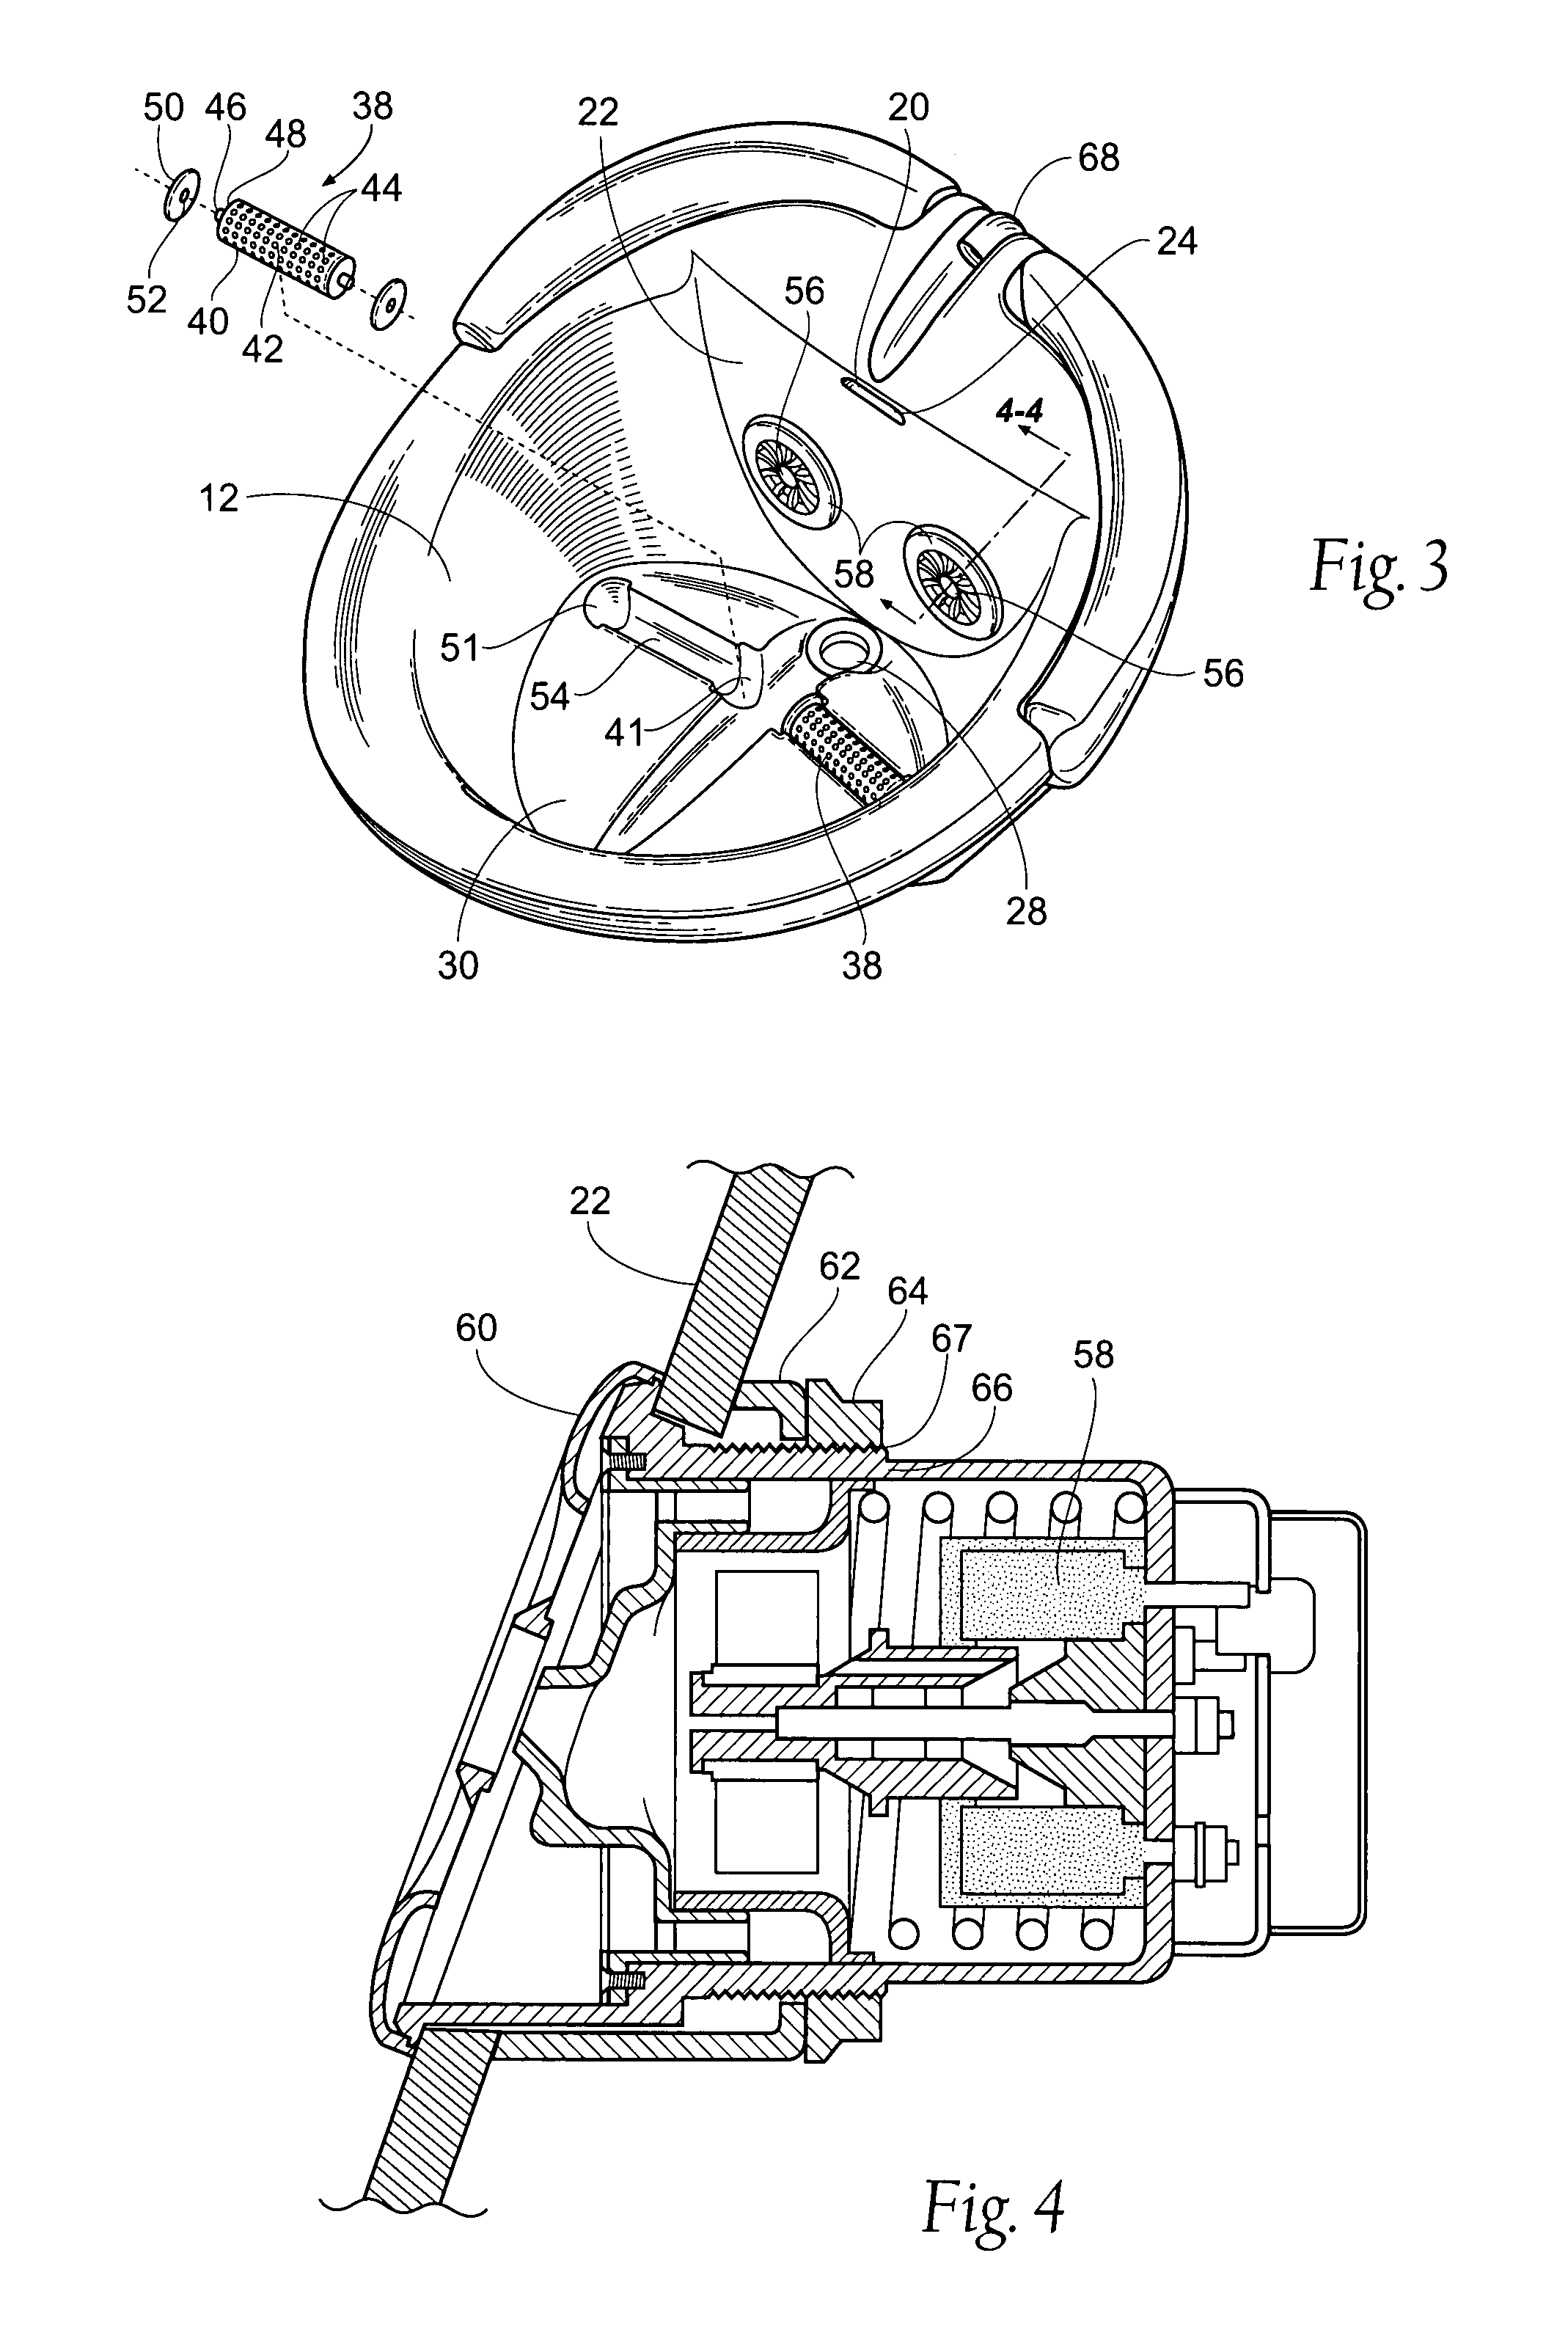 Basin for a foot spa